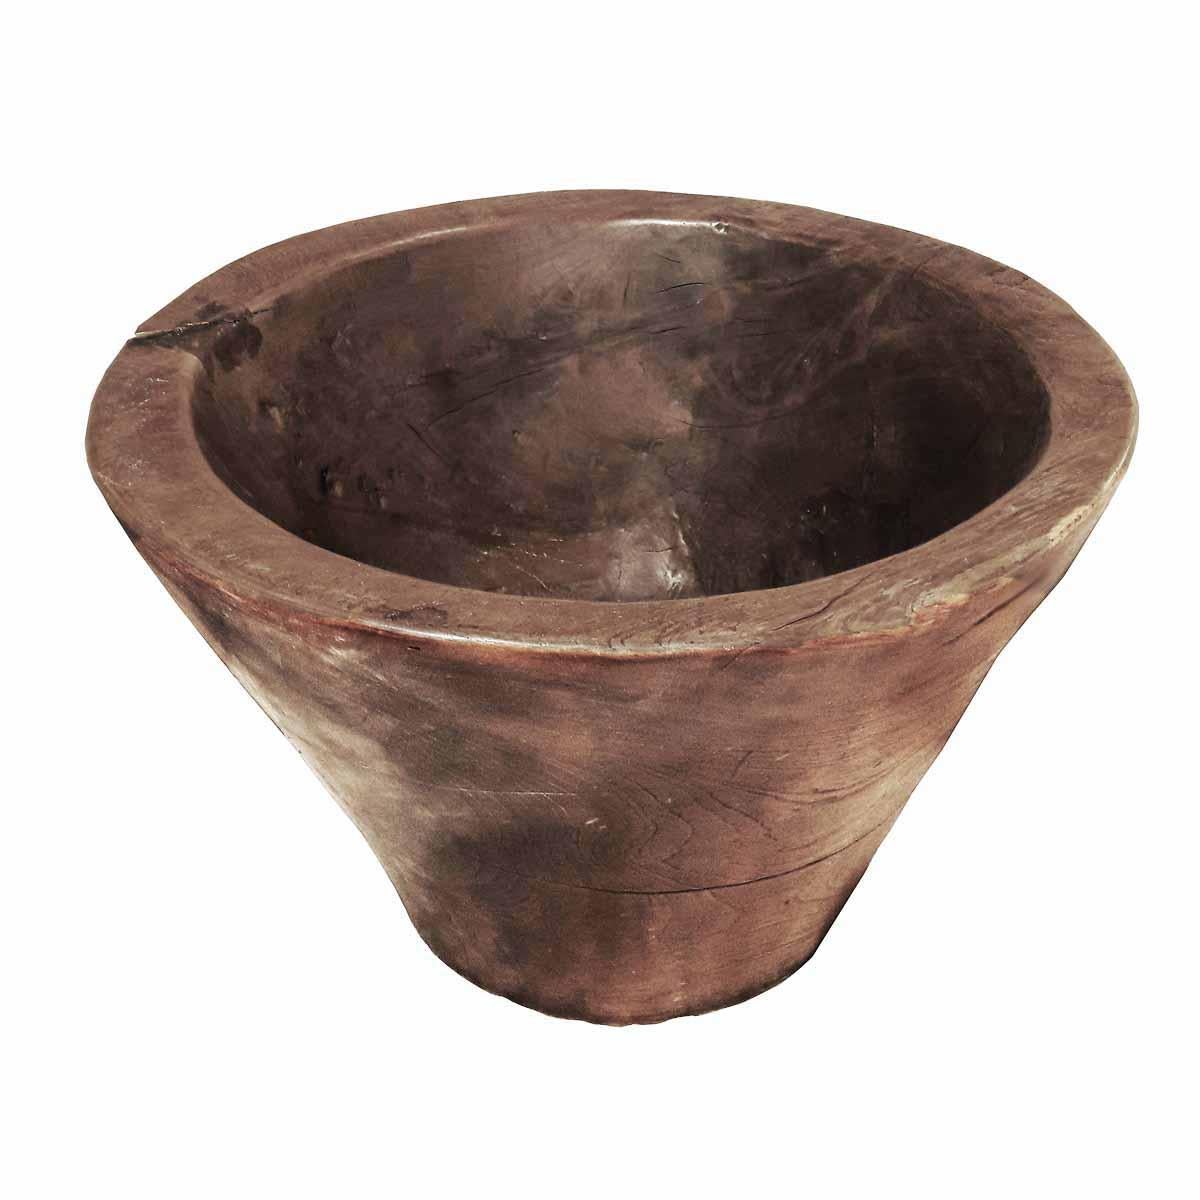 Teak Wood Bowl / Planter from Indonesia, Hand Carved, Mid-20th Century For Sale